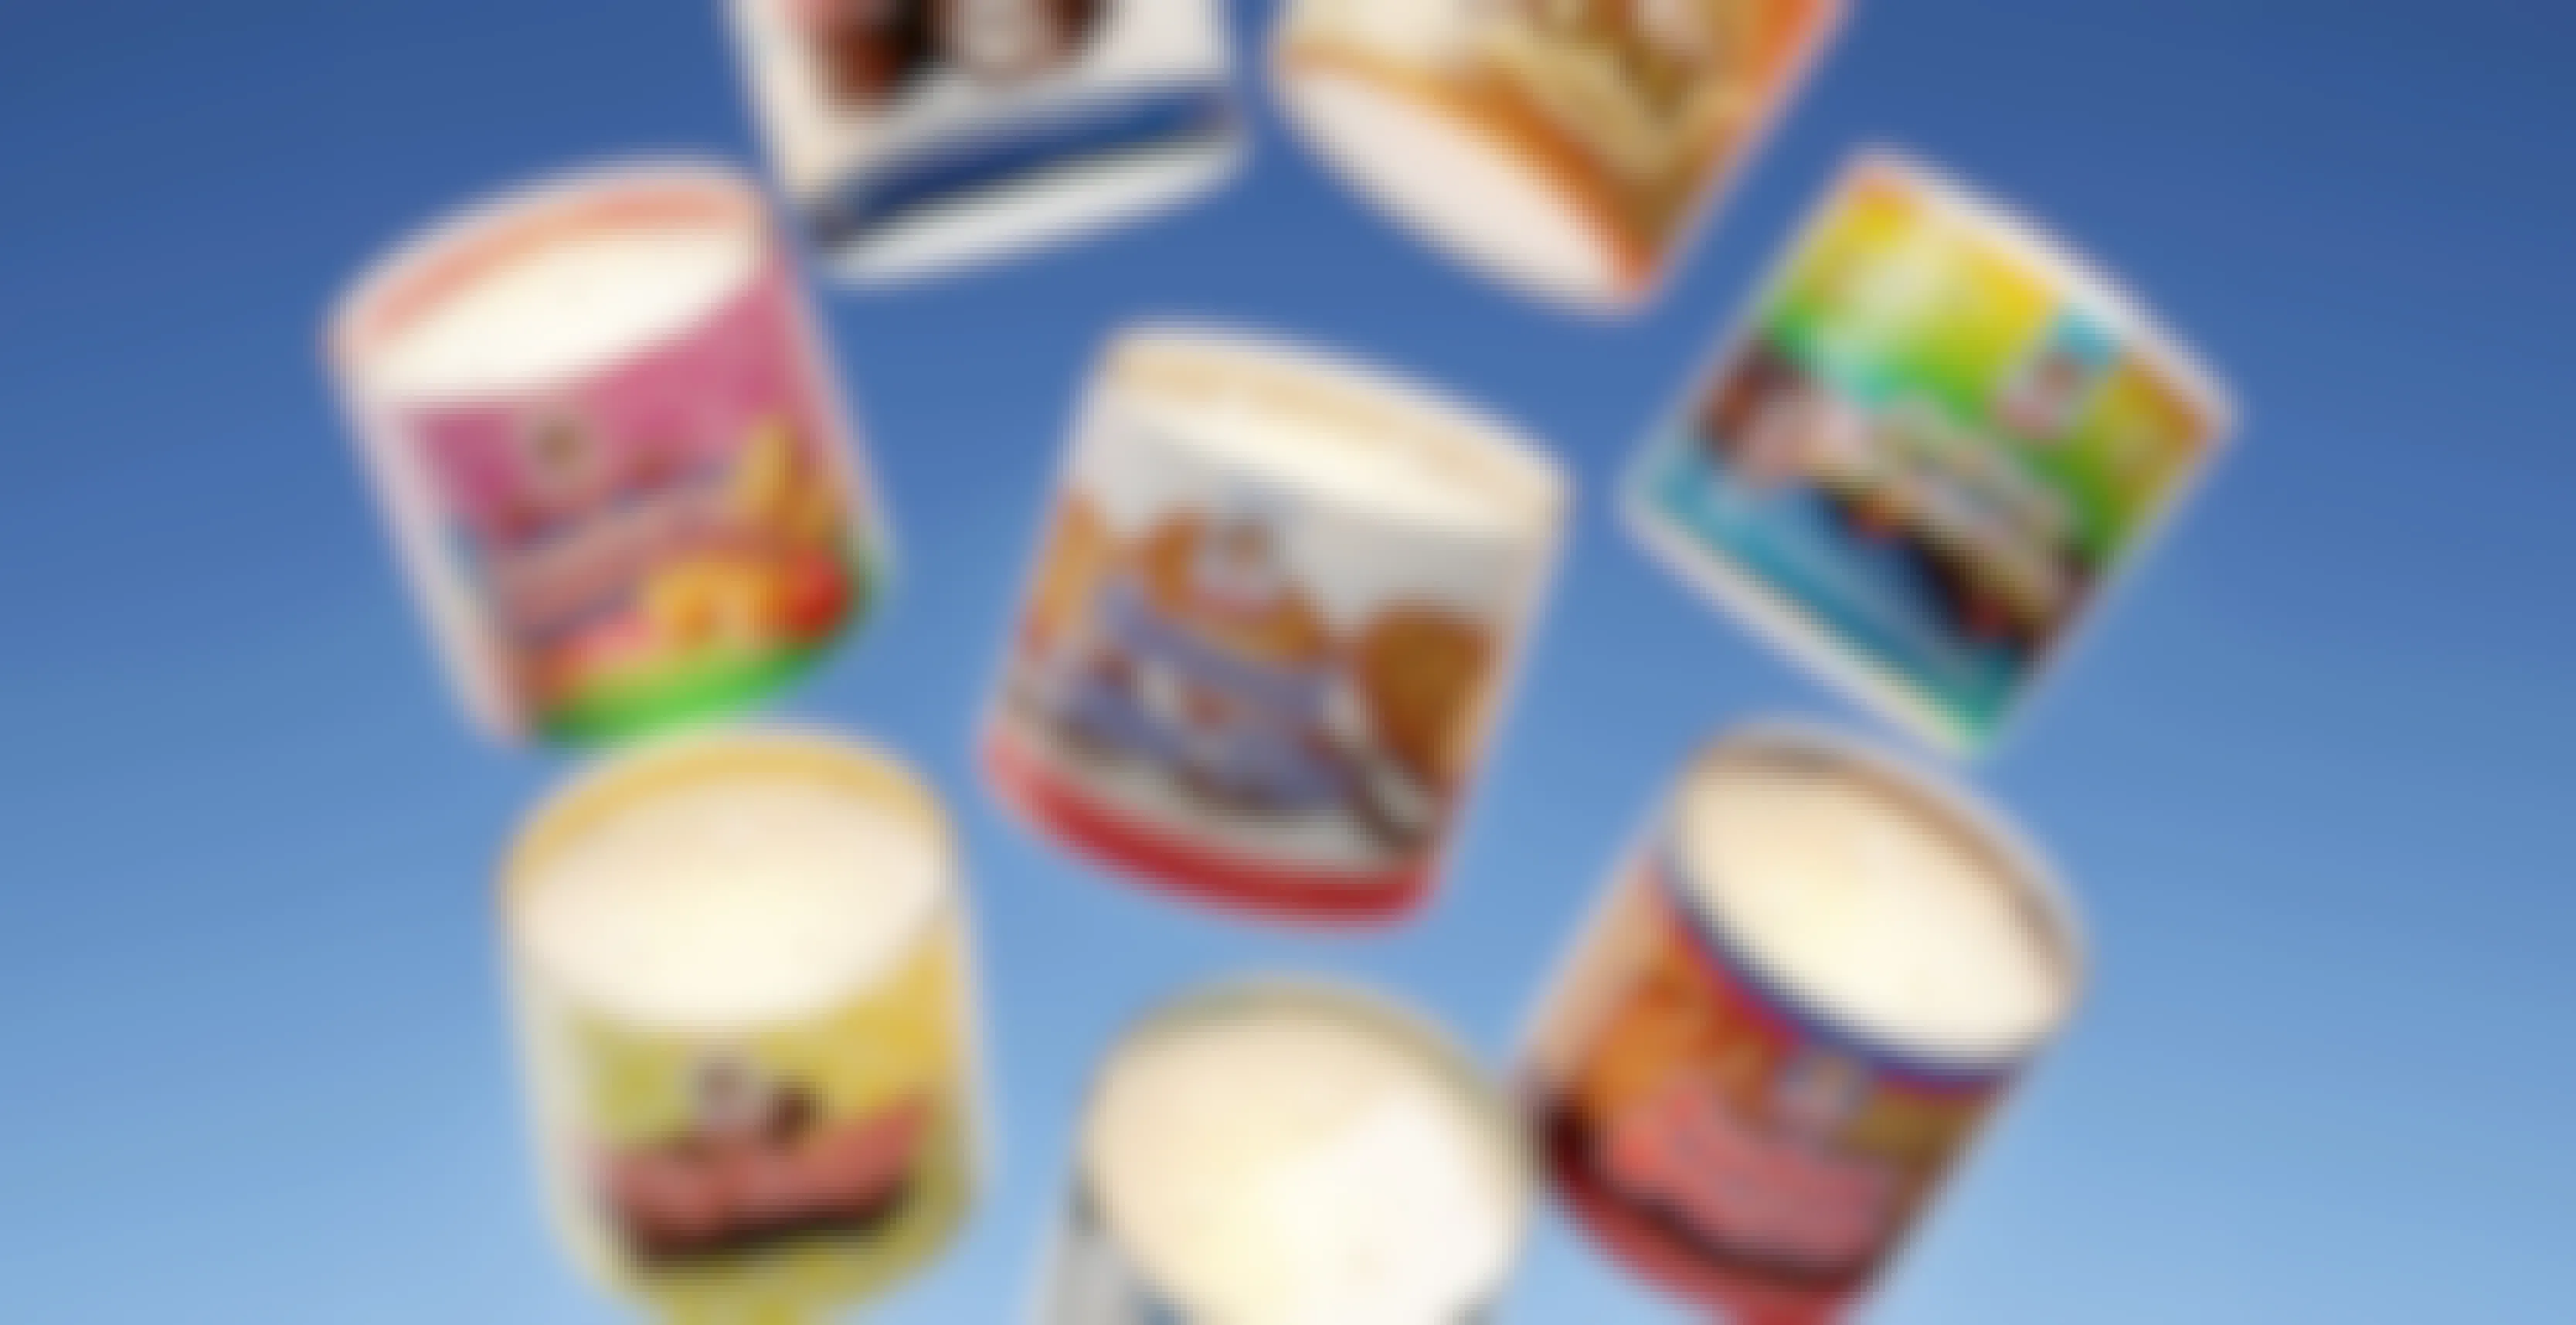 Little Debbie 3-Wick Candles Are Here for $13.99 — But Here's How to Save Even More